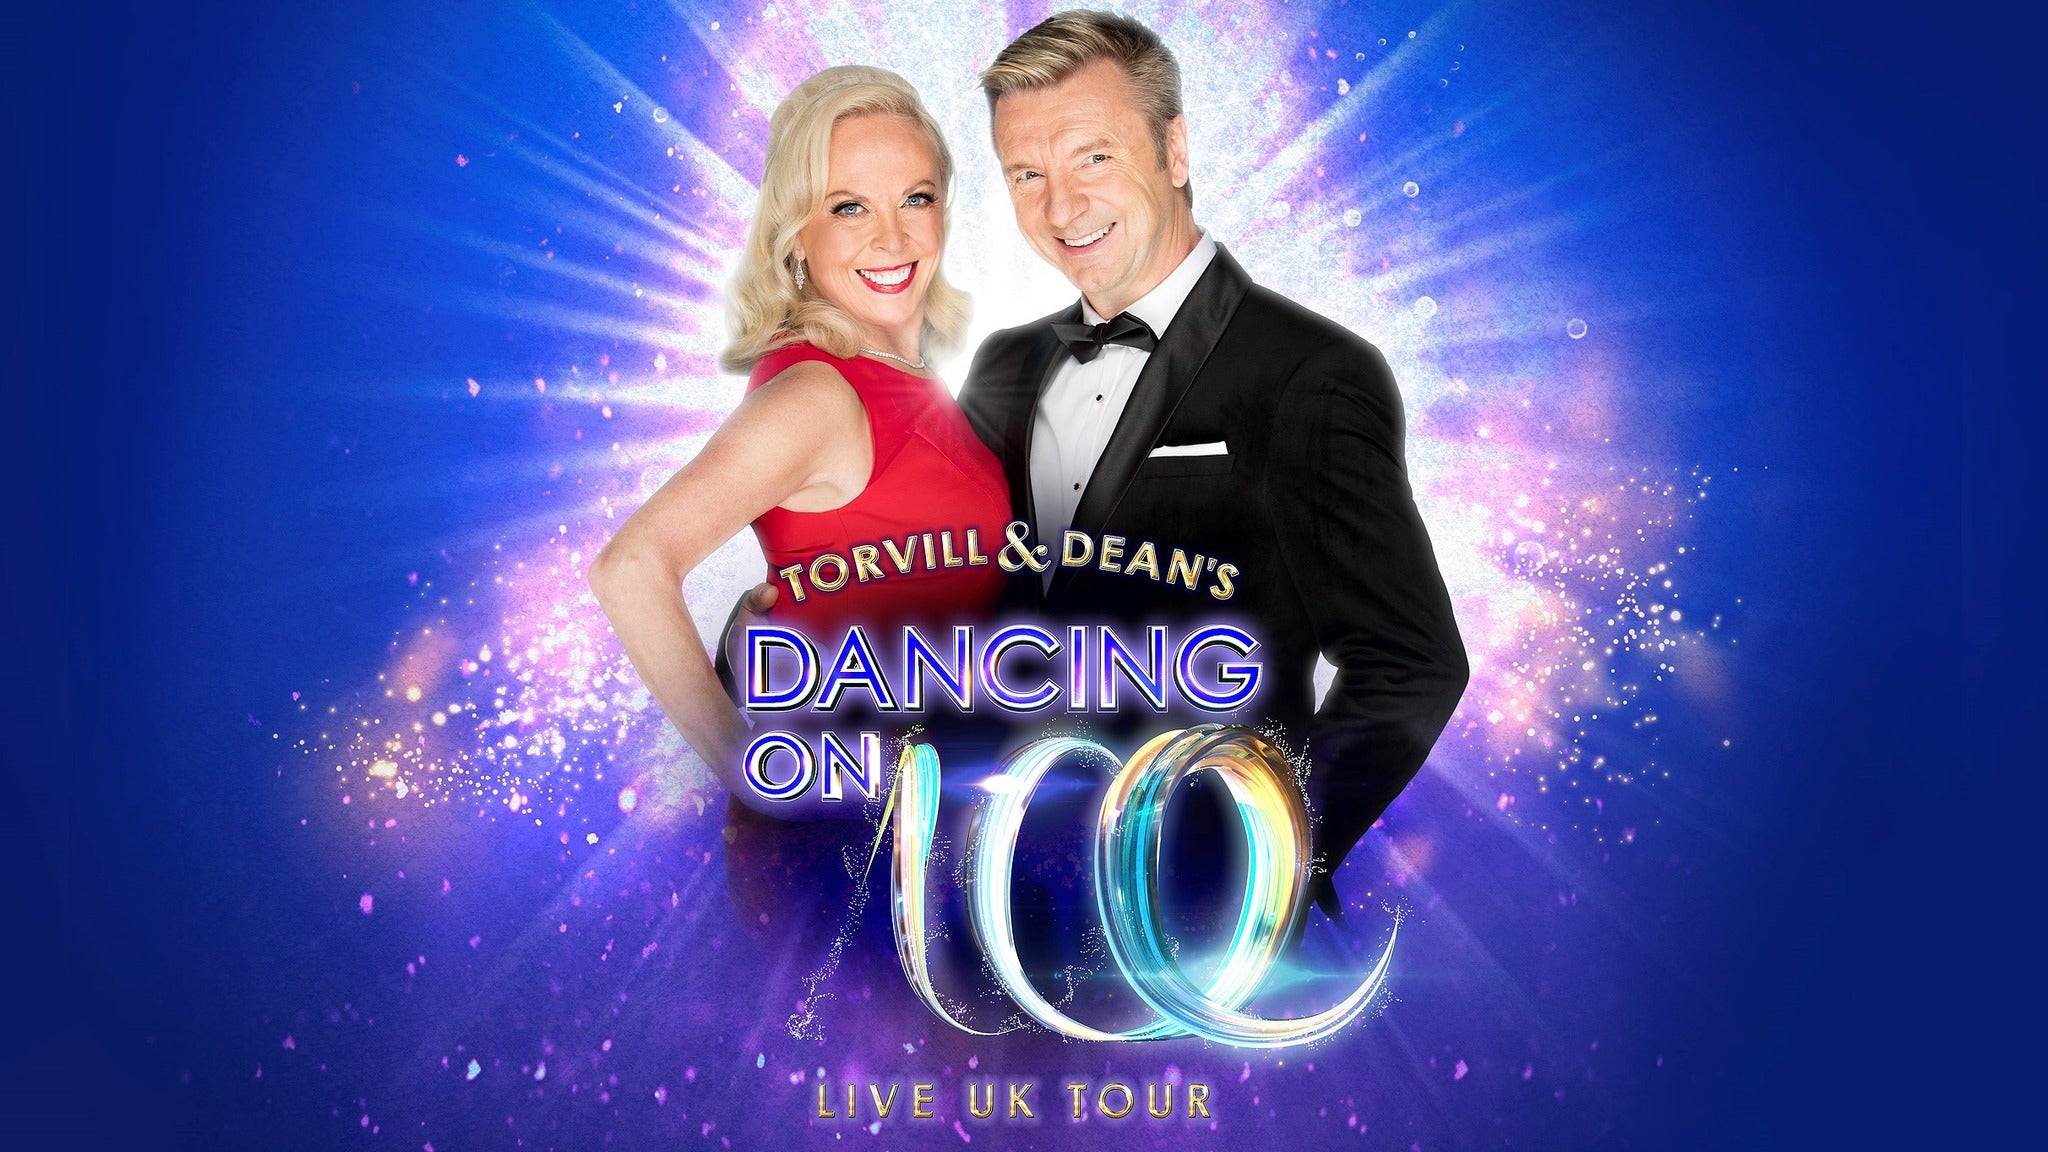 is there a dancing on ice tour this year